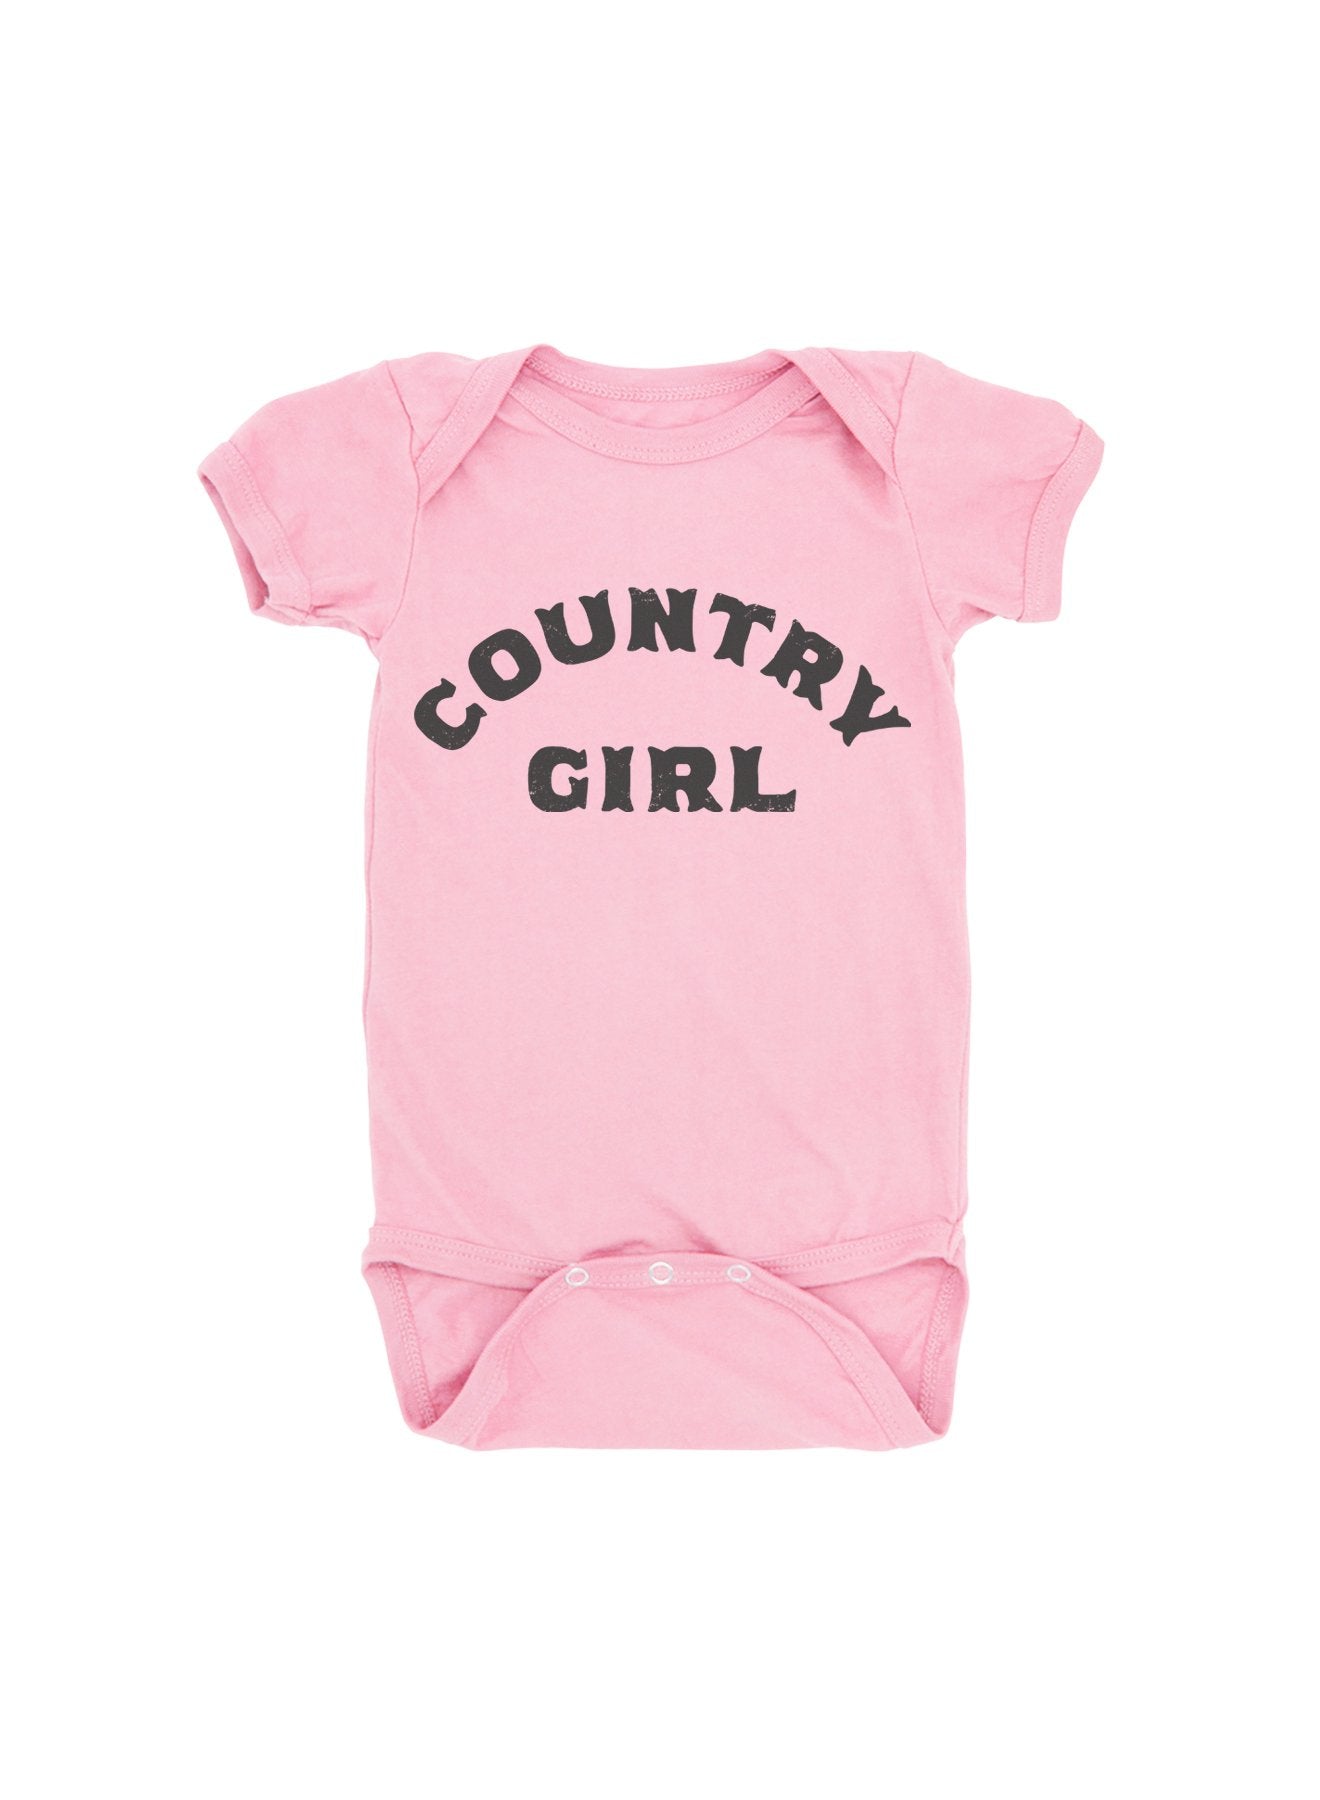 Country Girl One Piece  - Doodlebug's Children's Boutique